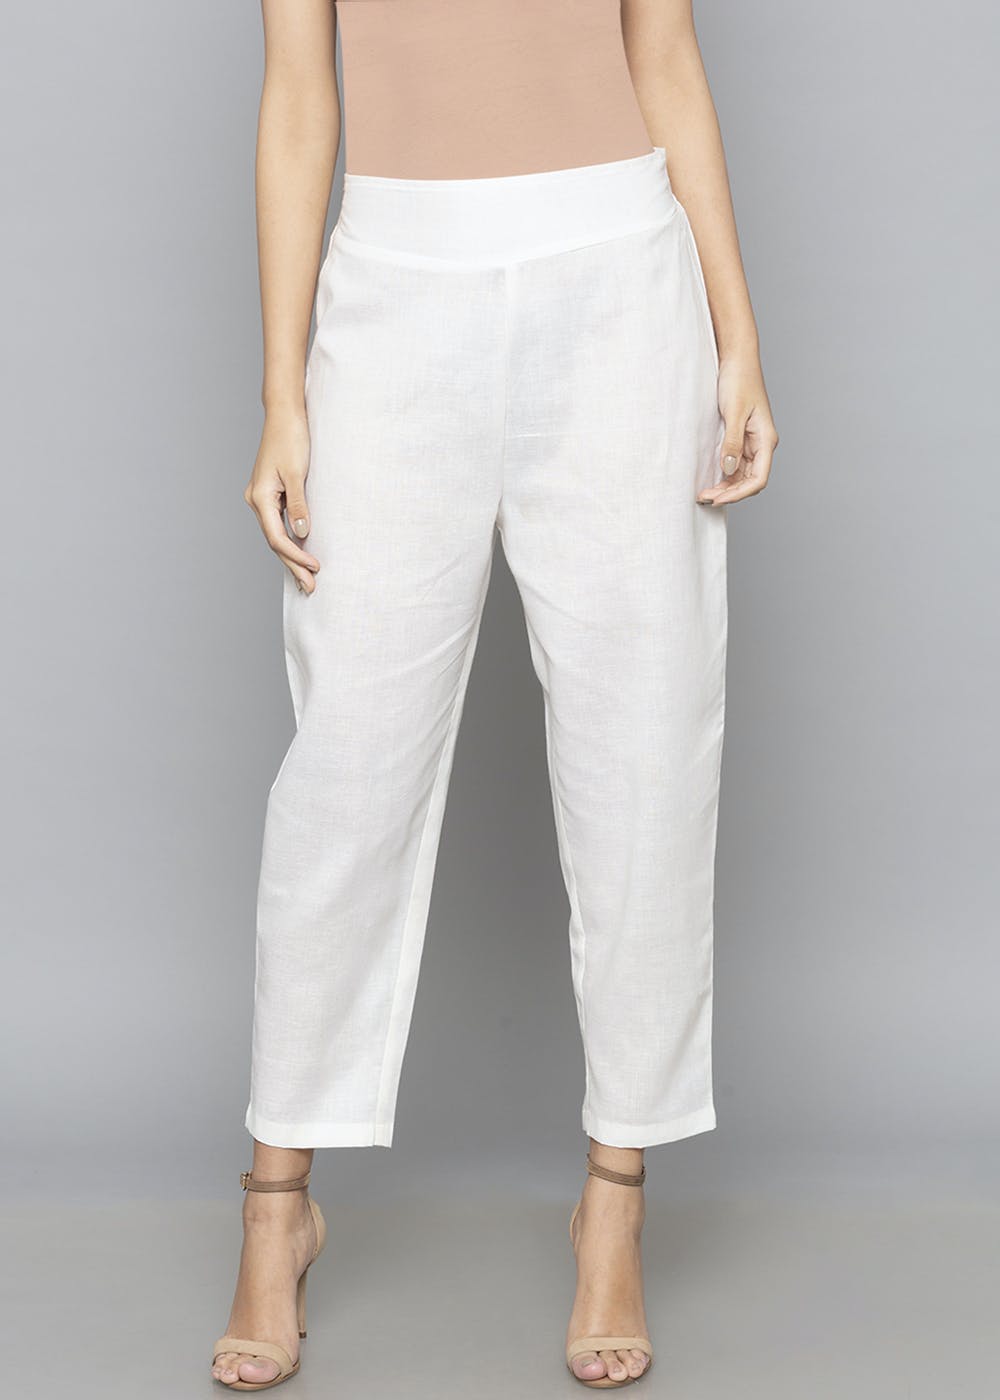 White Trousers - Buy White Trousers Online in India